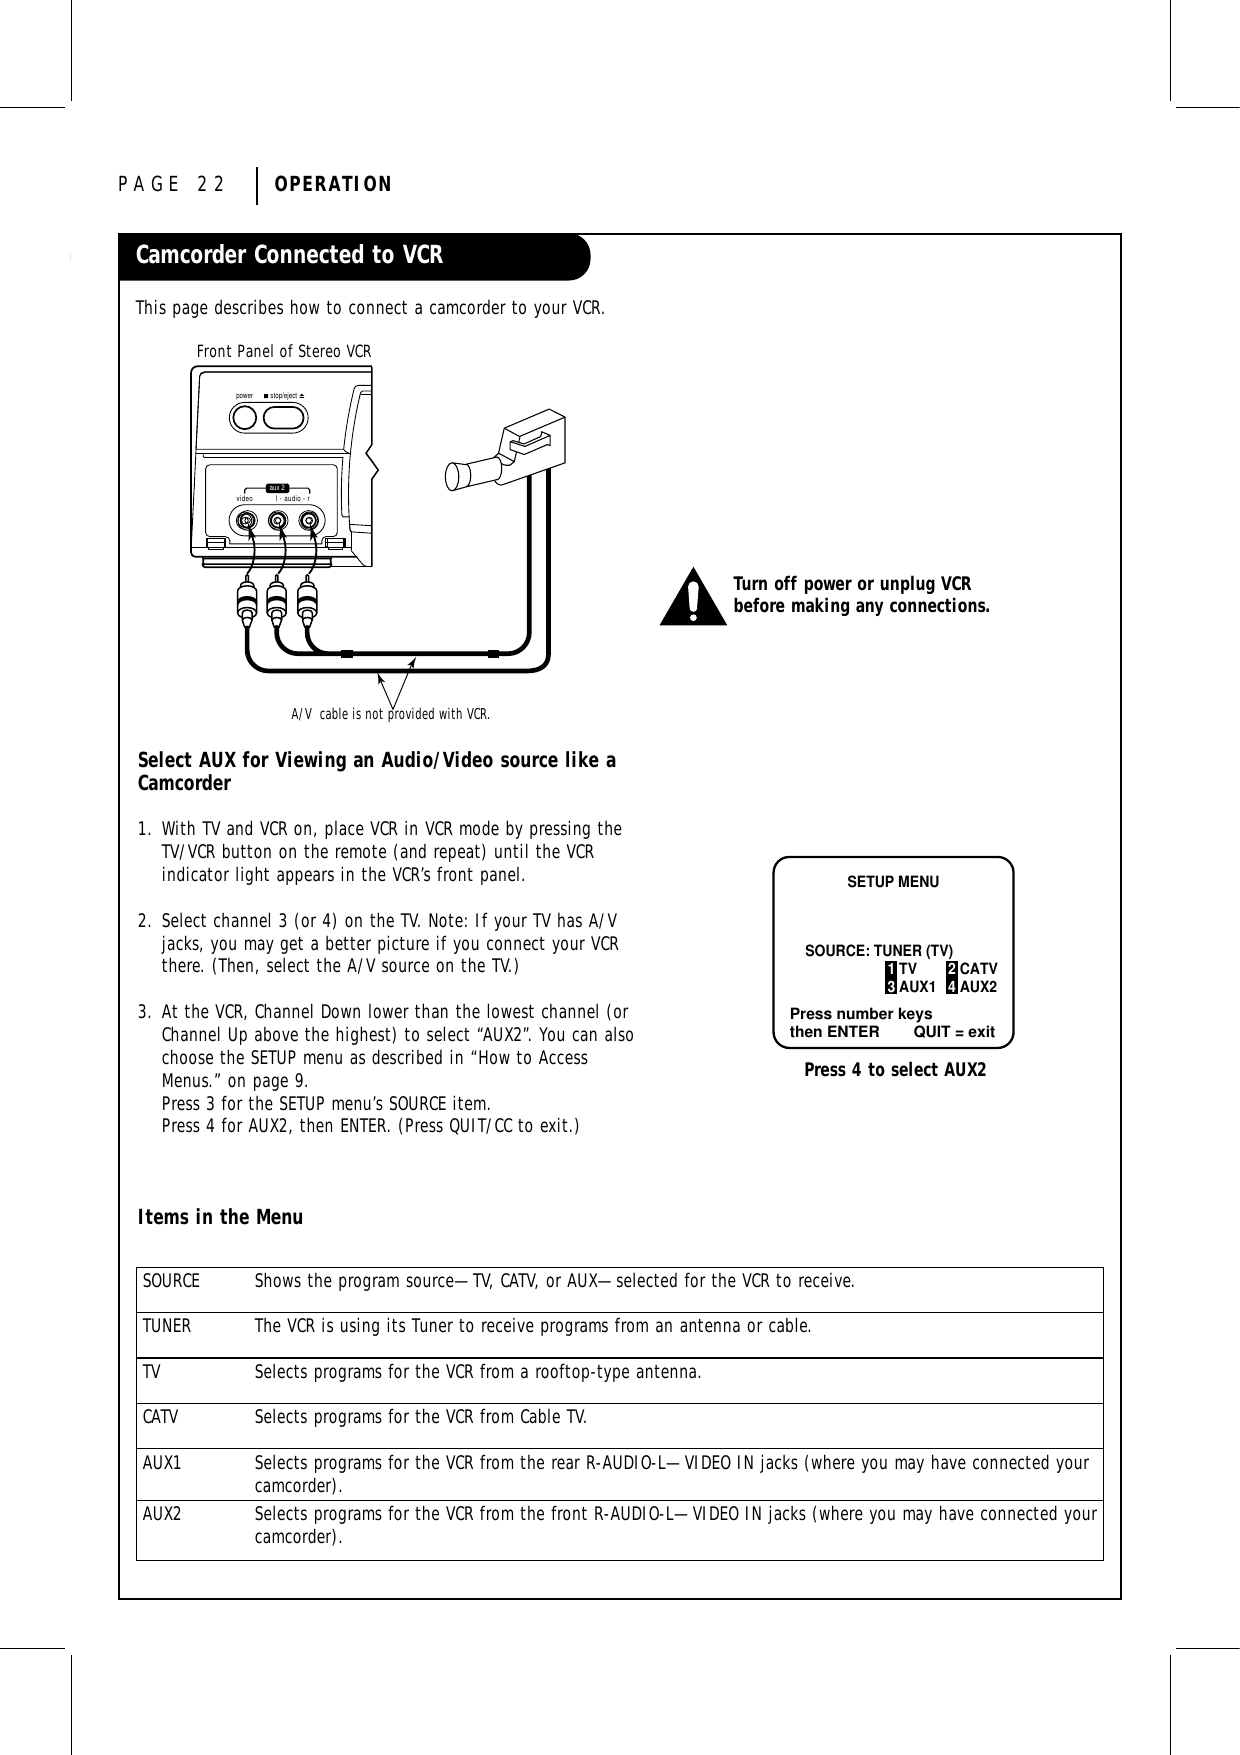 PAGE 22 OPERATIONCamcorder Connected to VCRThis page describes how to connect a camcorder to your VCR.Front Panel of Stereo VCRA/V  cable is not provided with VCR.video l - audio - rstop/ejectpoweraux 2Select AUX for Viewing an Audio/Video source like aCamcorder1. With TV and VCR on, place VCR in VCR mode by pressing theTV/VCR button on the remote (and repeat) until the VCRindicator light appears in the VCR’s front panel.2. Select channel 3 (or 4) on the TV. Note: If your TV has A/Vjacks, you may get a better picture if you connect your VCRthere. (Then, select the A/V source on the TV.)3. At the VCR, Channel Down lower than the lowest channel (orChannel Up above the highest) to select “AUX2”. You can alsochoose the SETUP menu as described in “How to AccessMenus.” on page 9.Press 3 for the SETUP menu’s SOURCE item.Press 4 for AUX2, then ENTER. (Press QUIT/CC to exit.)Items in the MenuTurn off power or unplug VCRbefore making any connections.Press number keysthen ENTER QUIT = exitSETUP MENUSOURCE: TUNER (TV)1 TV 2 CATV3 AUX1 4 AUX2Press 4 to select AUX2SOURCE Shows the program source—TV, CATV, or AUX—selected for the VCR to receive.TUNER The VCR is using its Tuner to receive programs from an antenna or cable.TV Selects programs for the VCR from a rooftop-type antenna.CATV Selects programs for the VCR from Cable TV.AUX1 Selects programs for the VCR from the rear R-AUDIO-L—VIDEO IN jacks (where you may have connected yourcamcorder).AUX2 Selects programs for the VCR from the front R-AUDIO-L—VIDEO IN jacks (where you may have connected yourcamcorder).